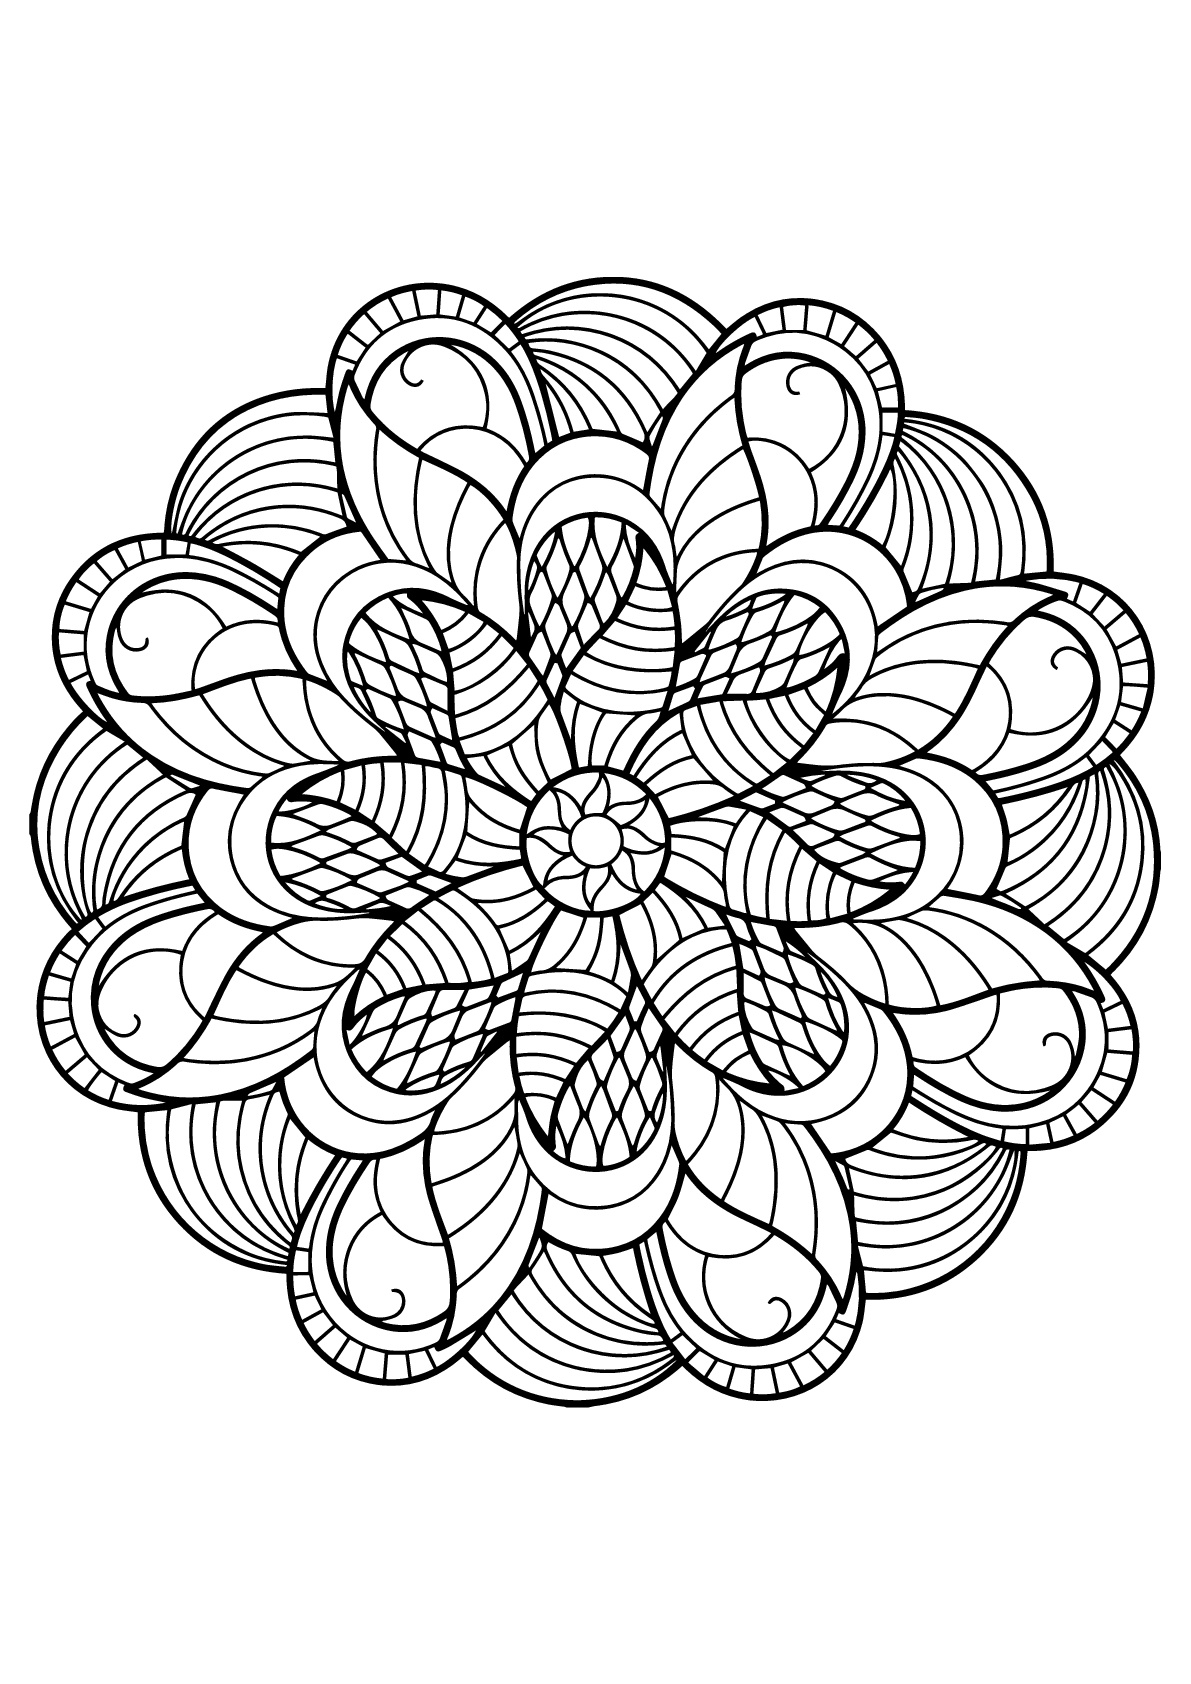 Very original Mandala from Free Coloring book for adults